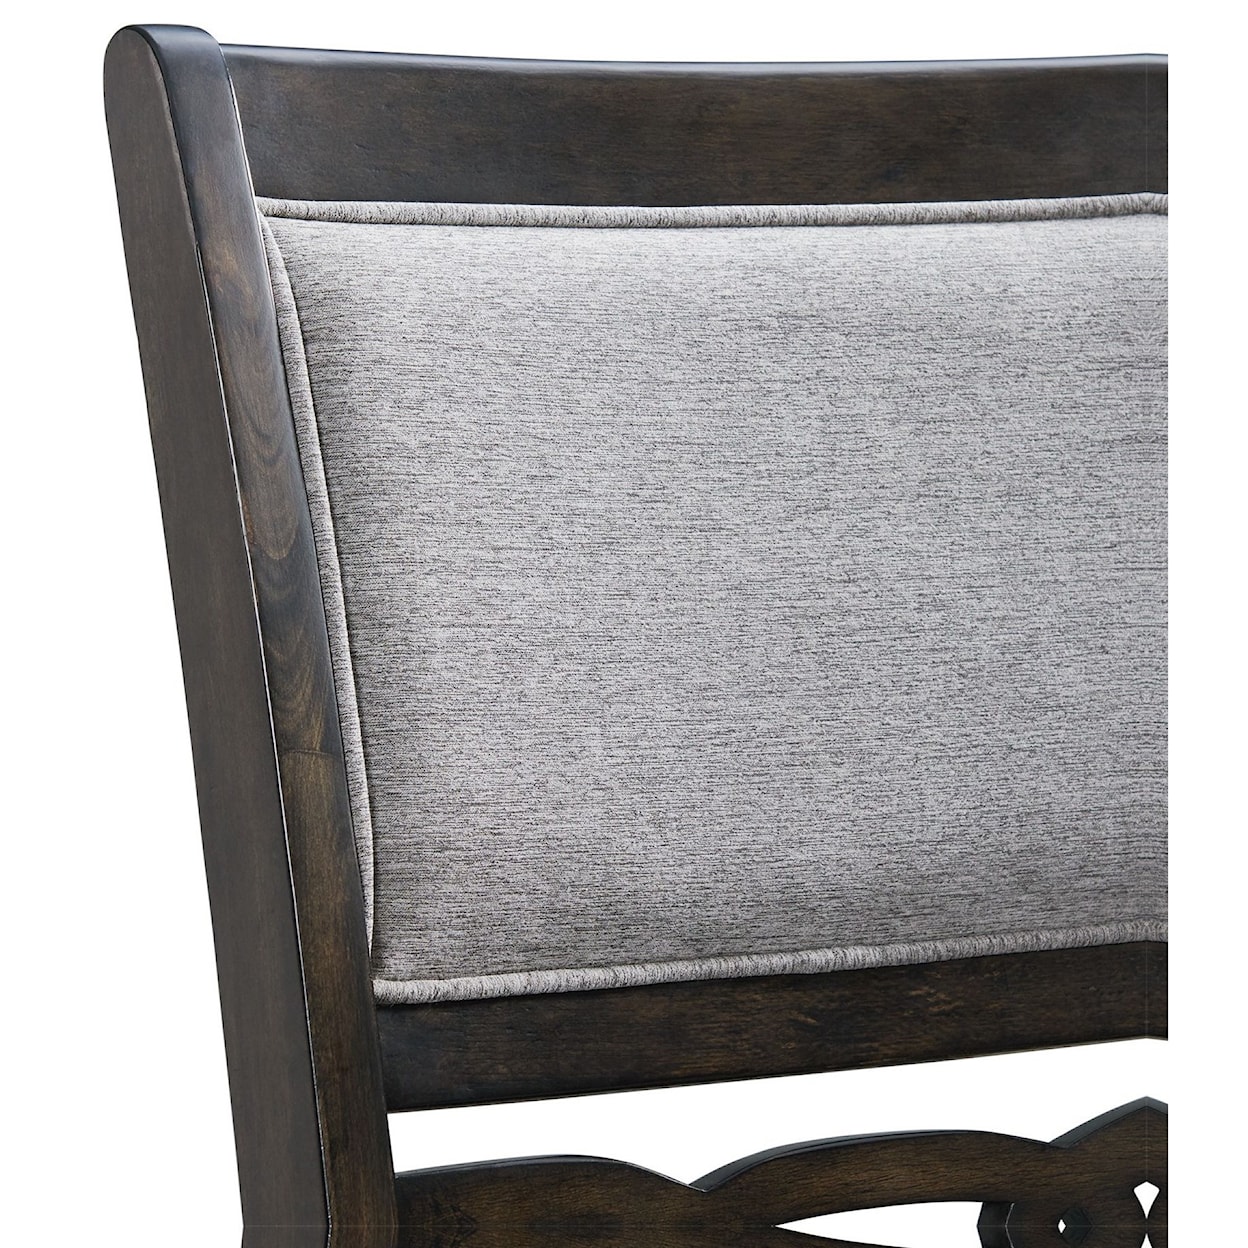 Elements Amherst Standard Height Side Chair